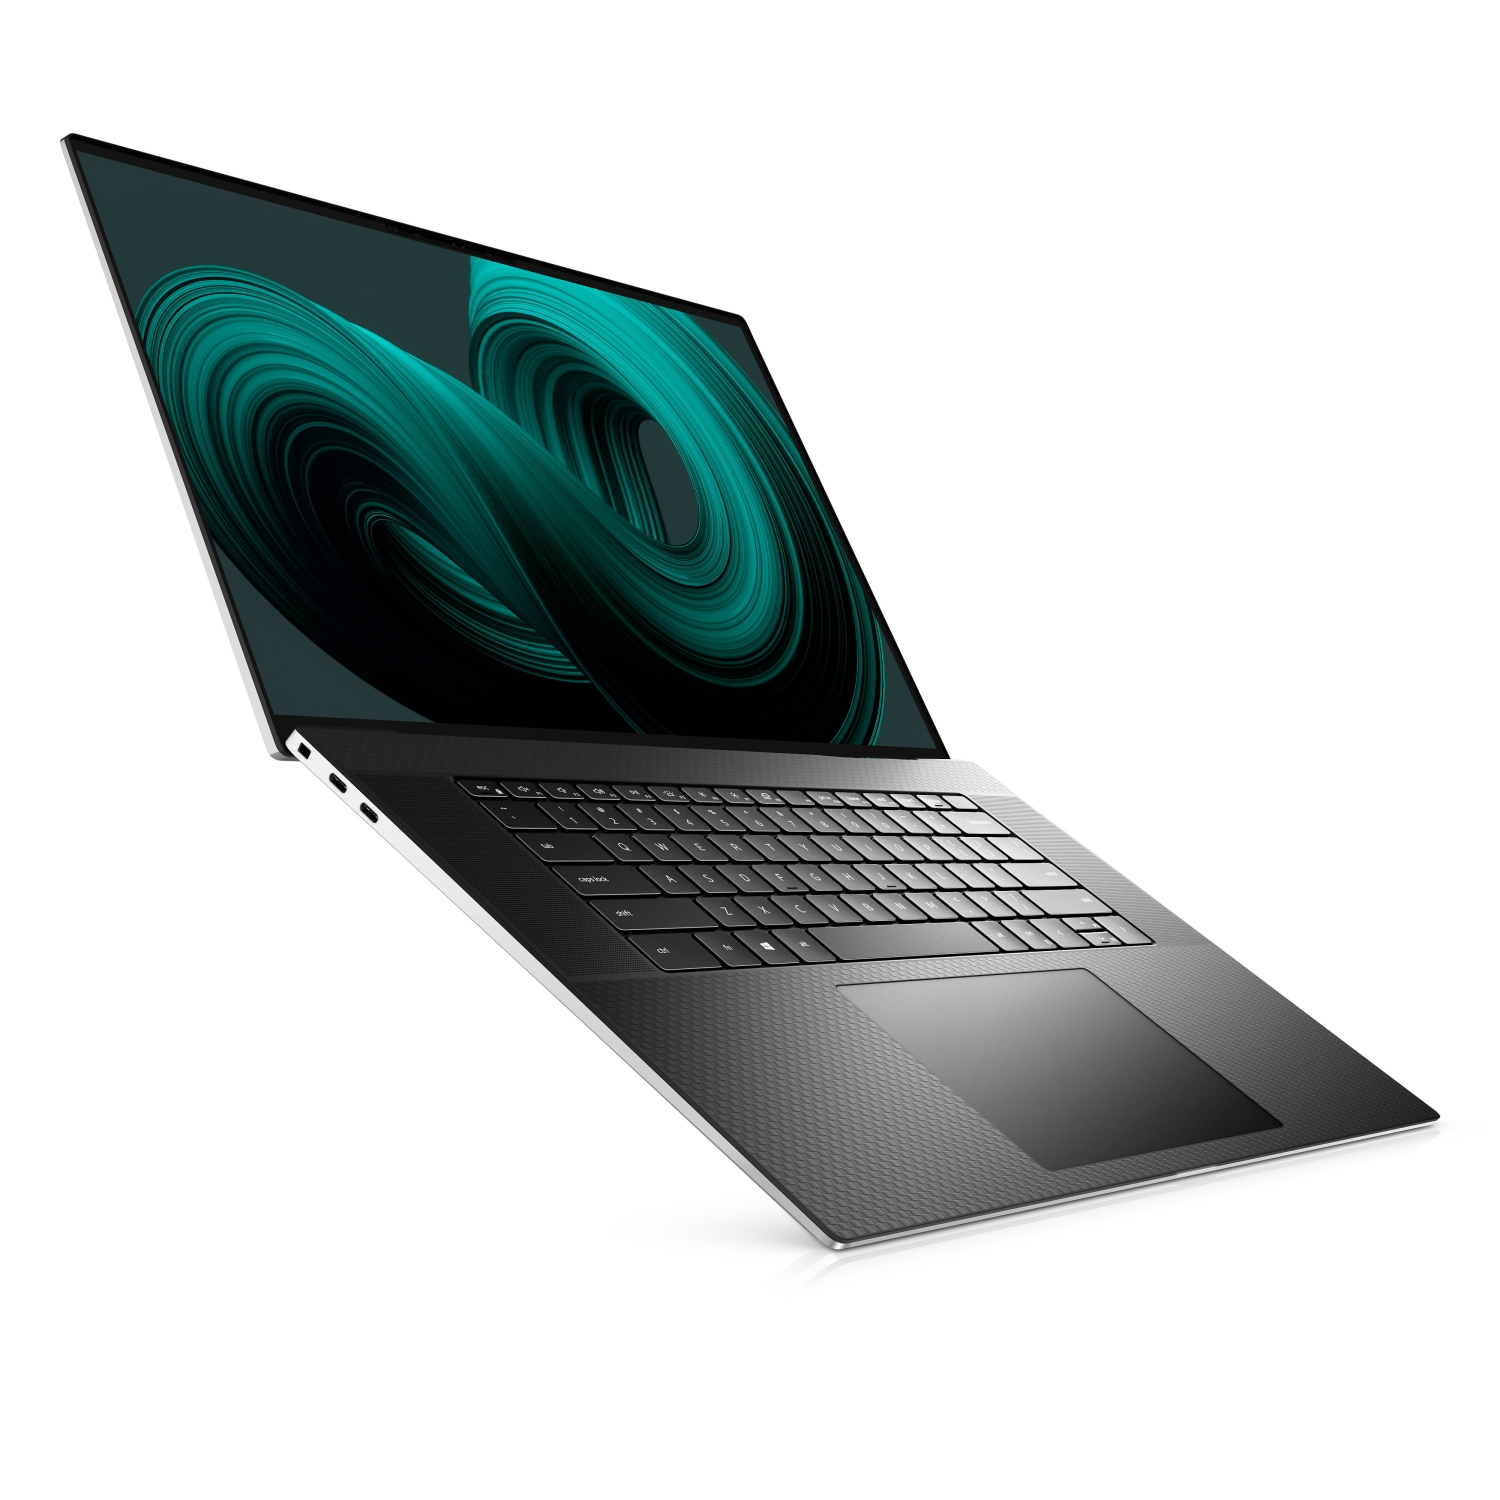 Refurbished (Excellent) - Dell XPS 17 9710 Laptop (2021) | 17" 4K Touch | Core i9 - 4TB SSD - 16GB RAM - RTX 3060 | 8 Cores @ 4.9 GHz - 11th Gen CPU Certified Refurbished